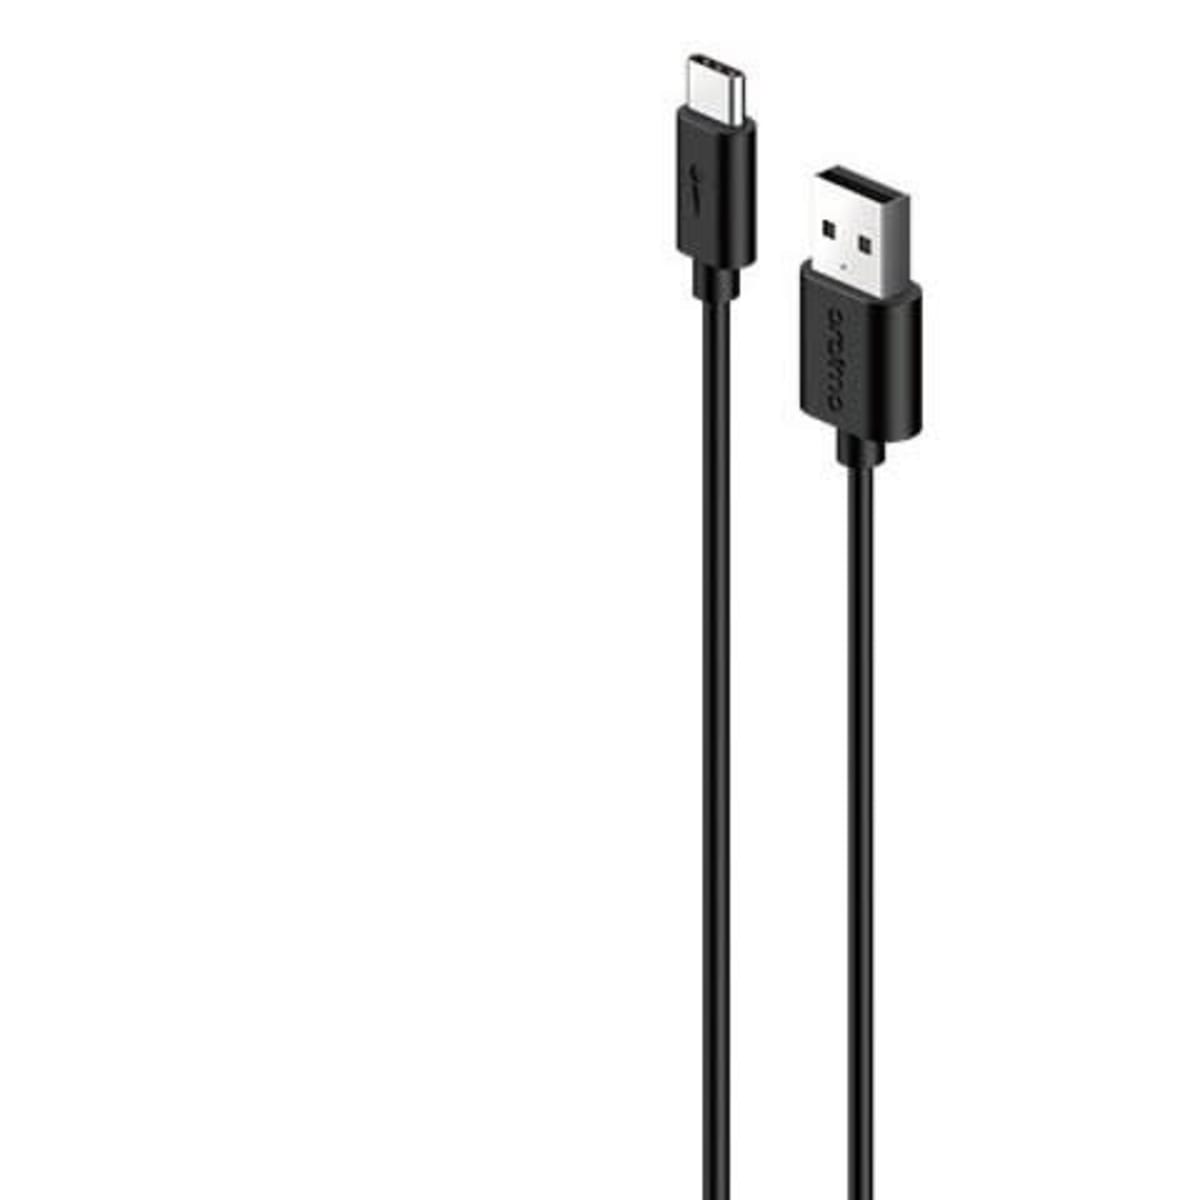 Oraimo Chargeur Android Avec Cable - Gixcor